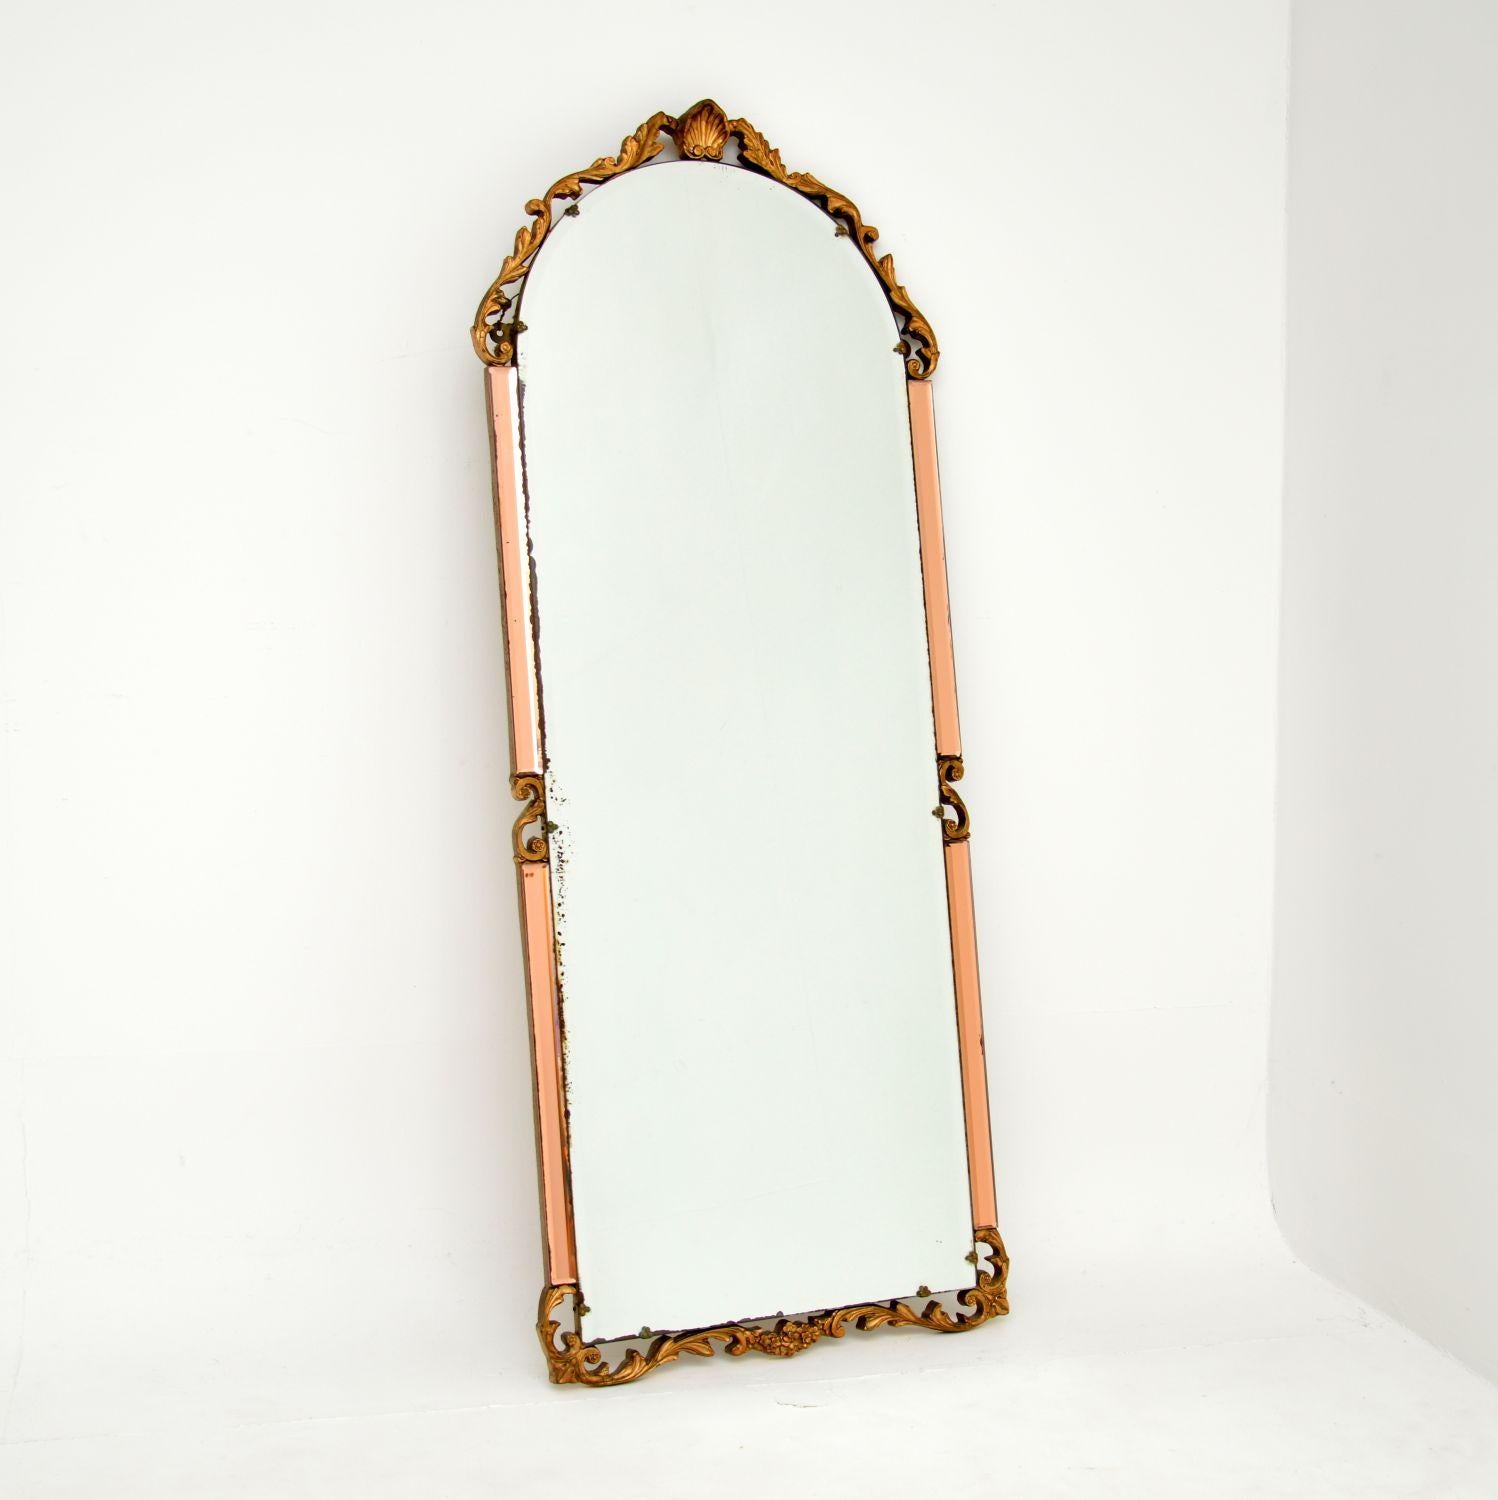 A beautiful and interesting antique mirror made from clear and peach bevelled glass. This was made in England, it dates from around the 1930’s period.

It is from the Art Deco period and is an interesting mix of styles. The peach and clear glass